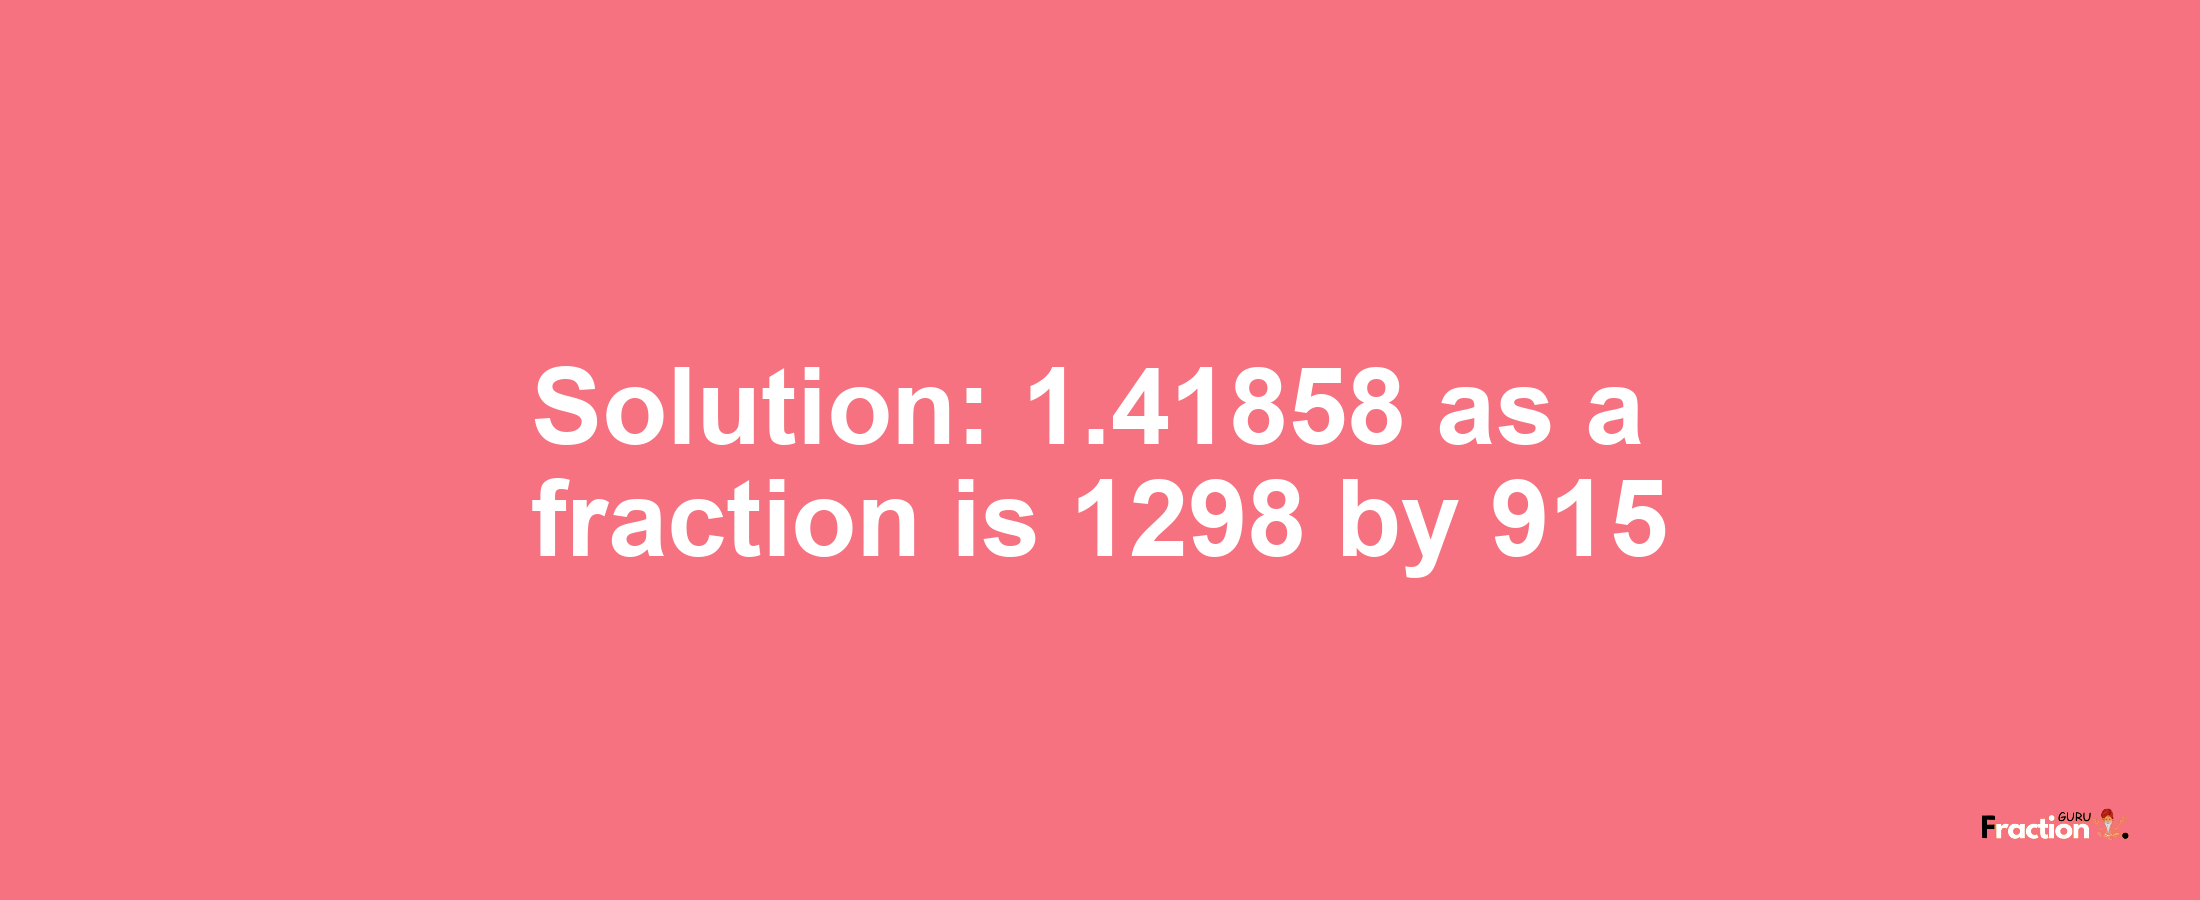 Solution:1.41858 as a fraction is 1298/915